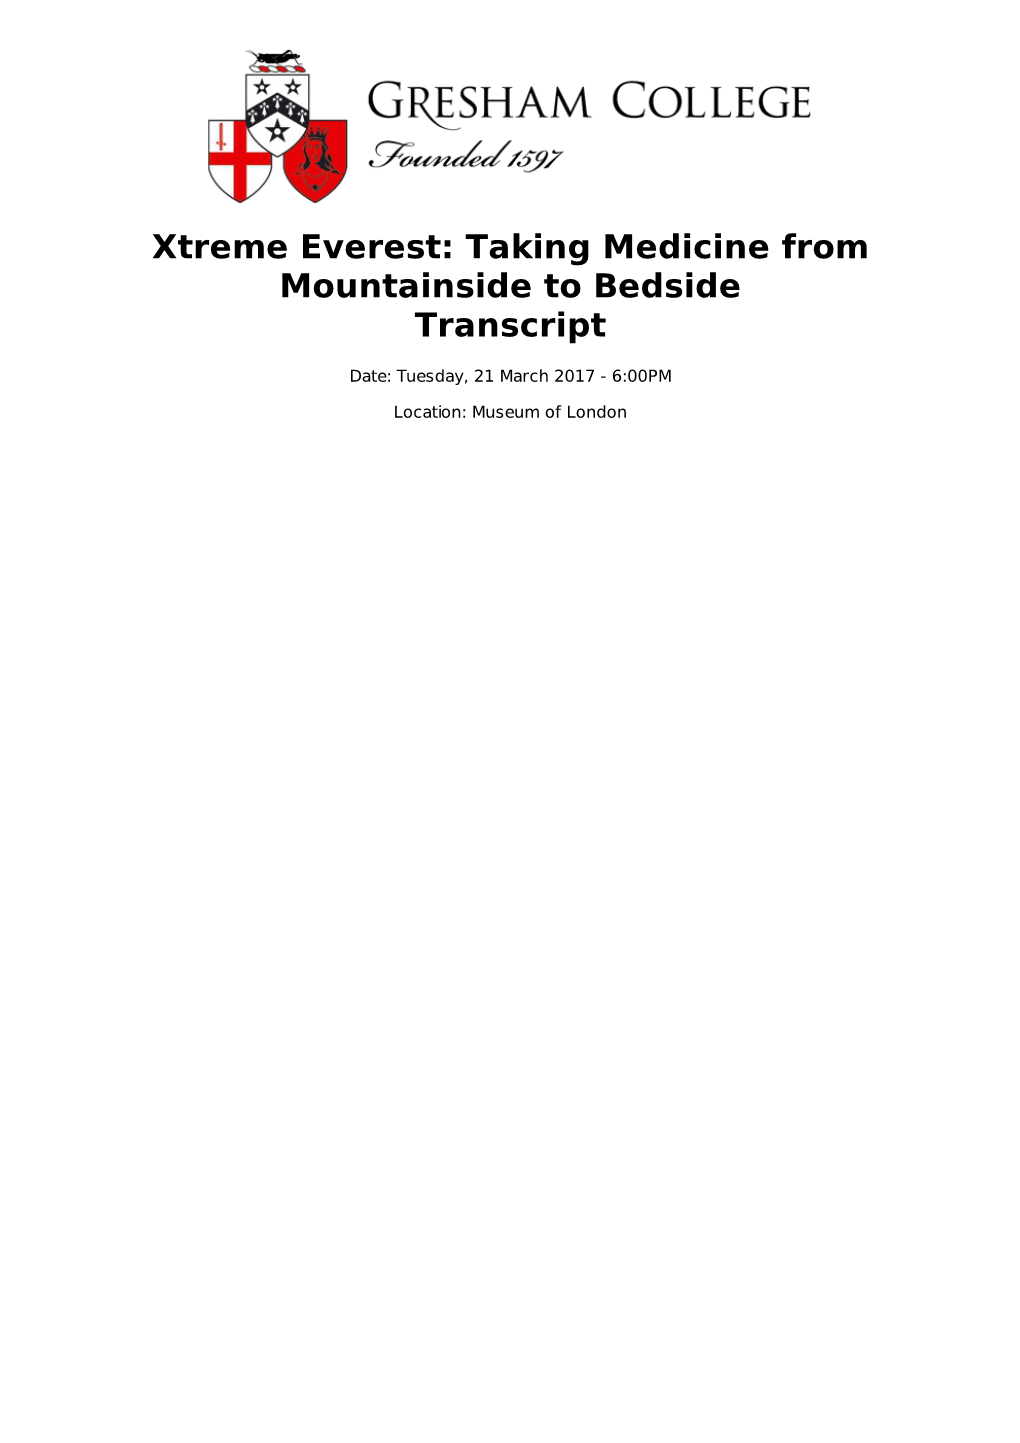 Xtreme Everest: Taking Medicine from Mountainside to Bedside Transcript